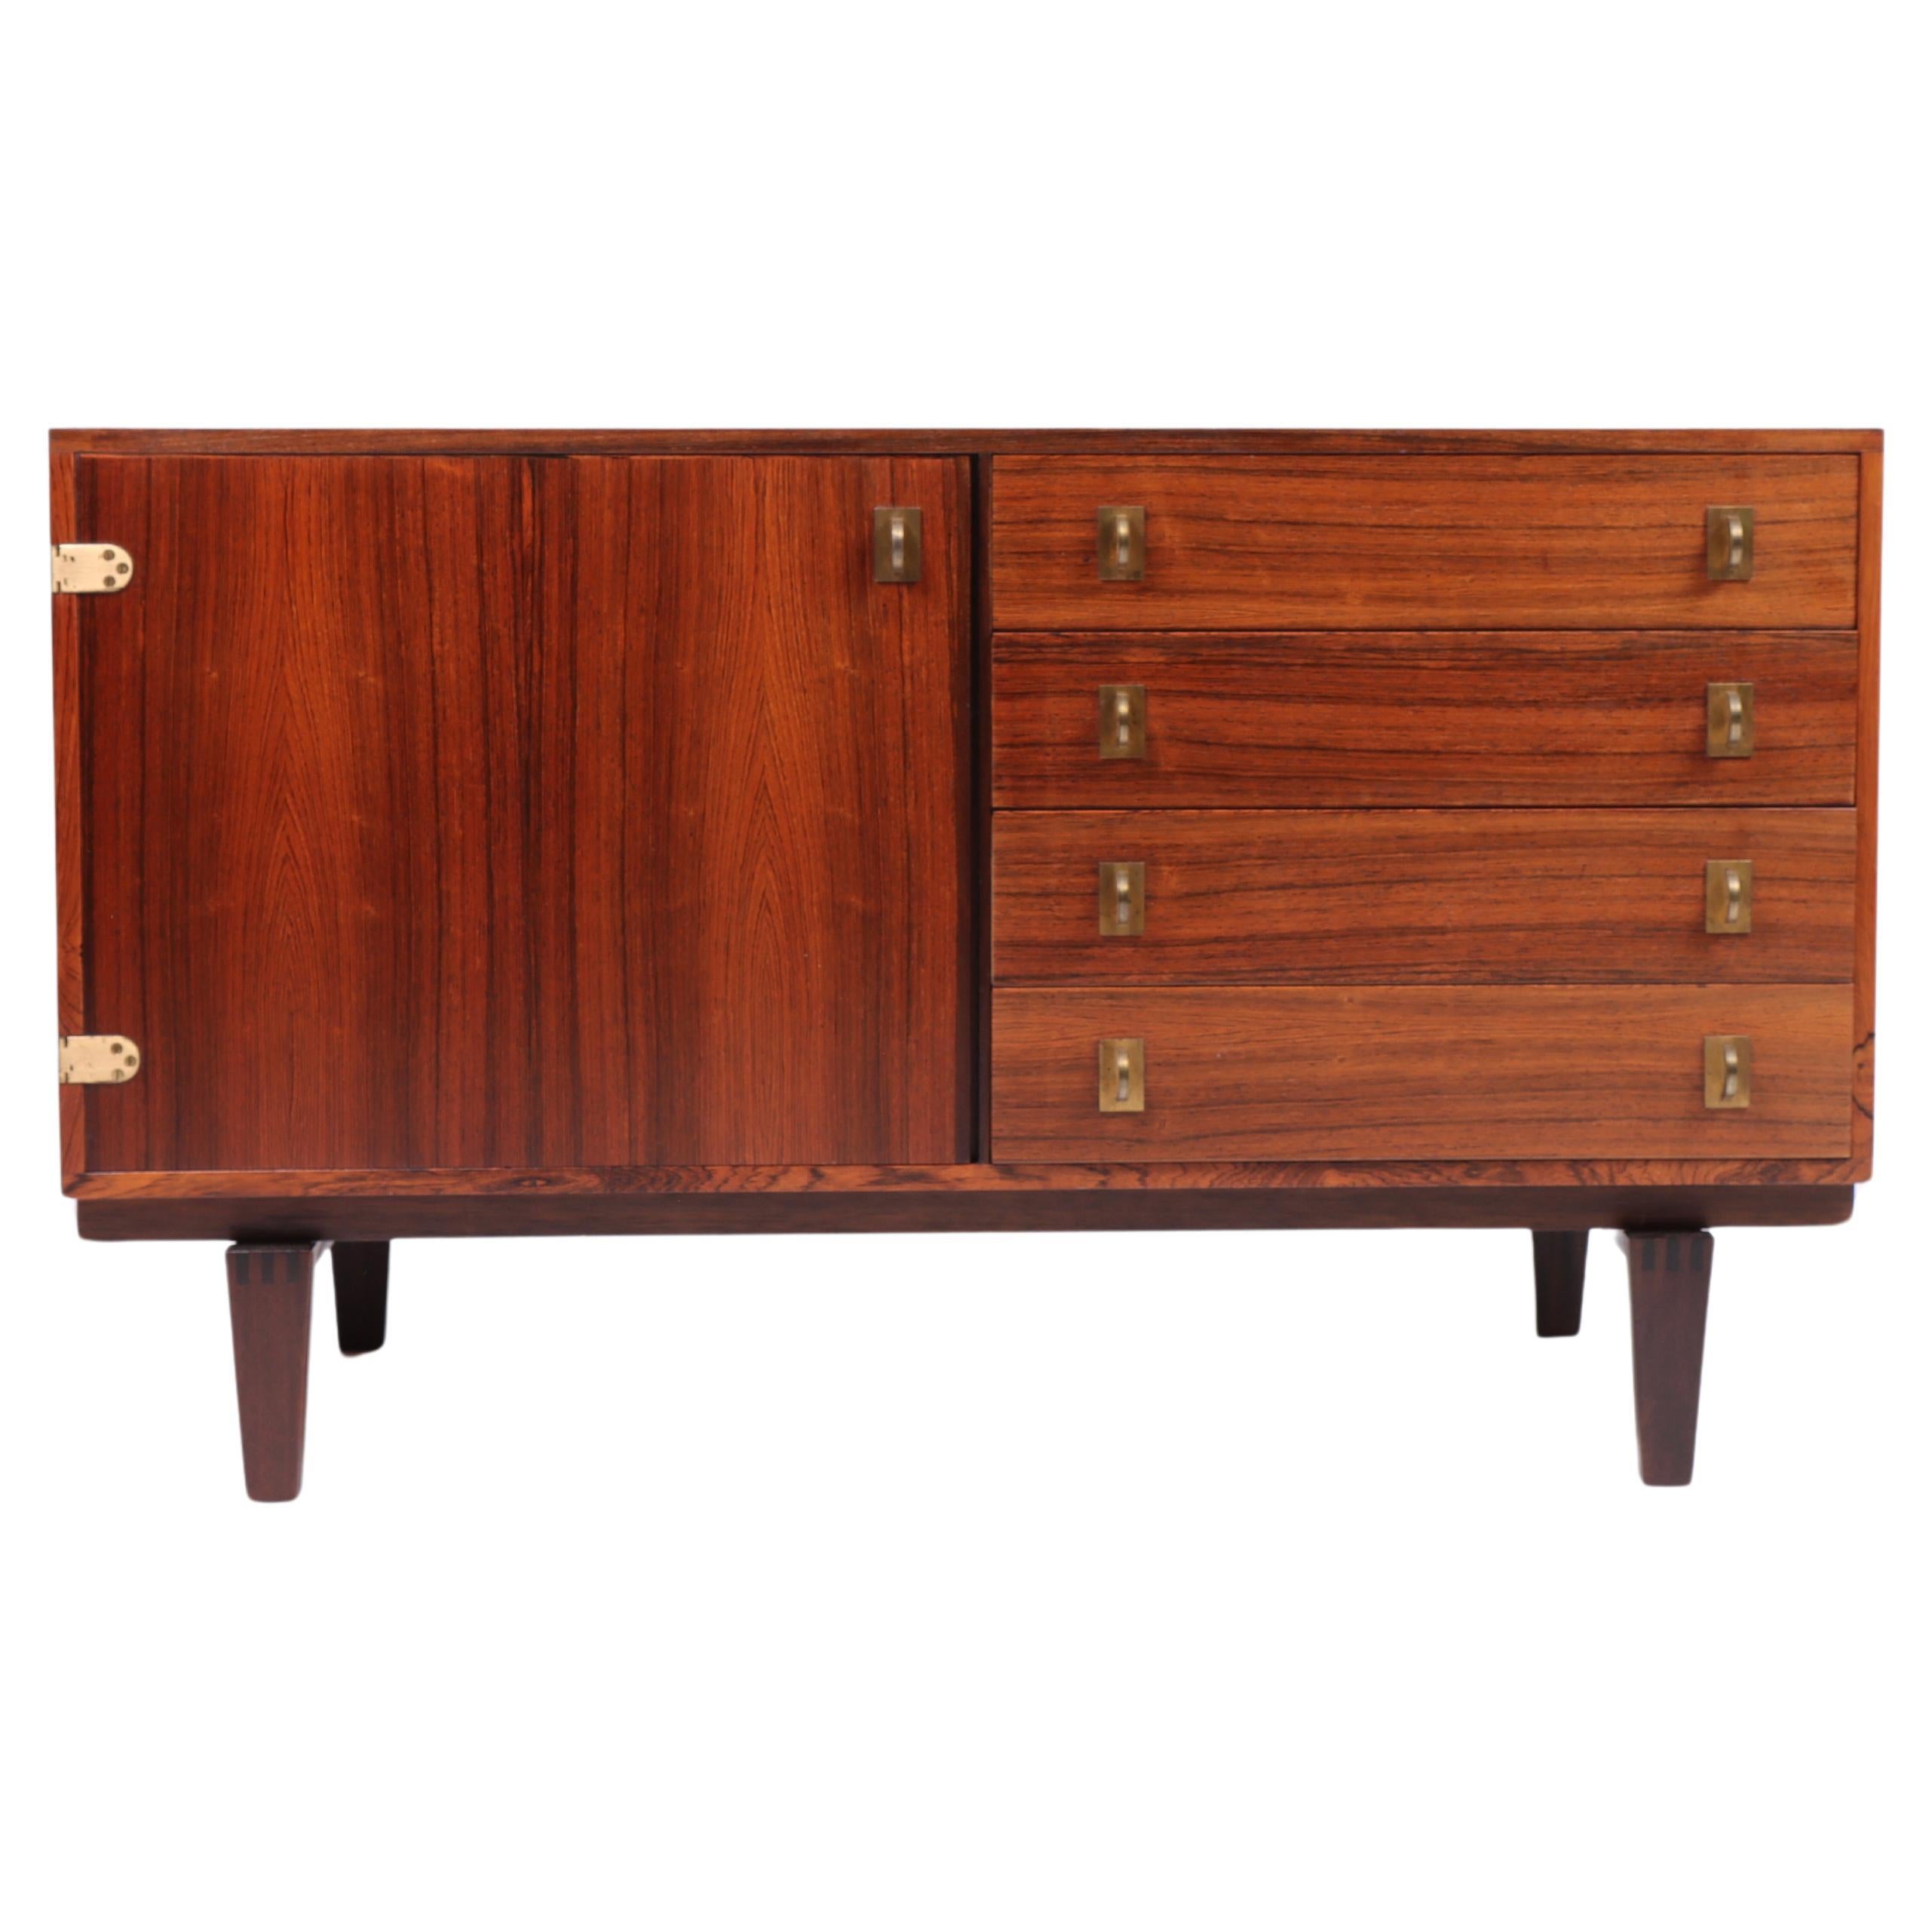 Midcentury Low Cabinet in Rosewood with Brass Hardware by Løgvig, Denmark, 1960s For Sale